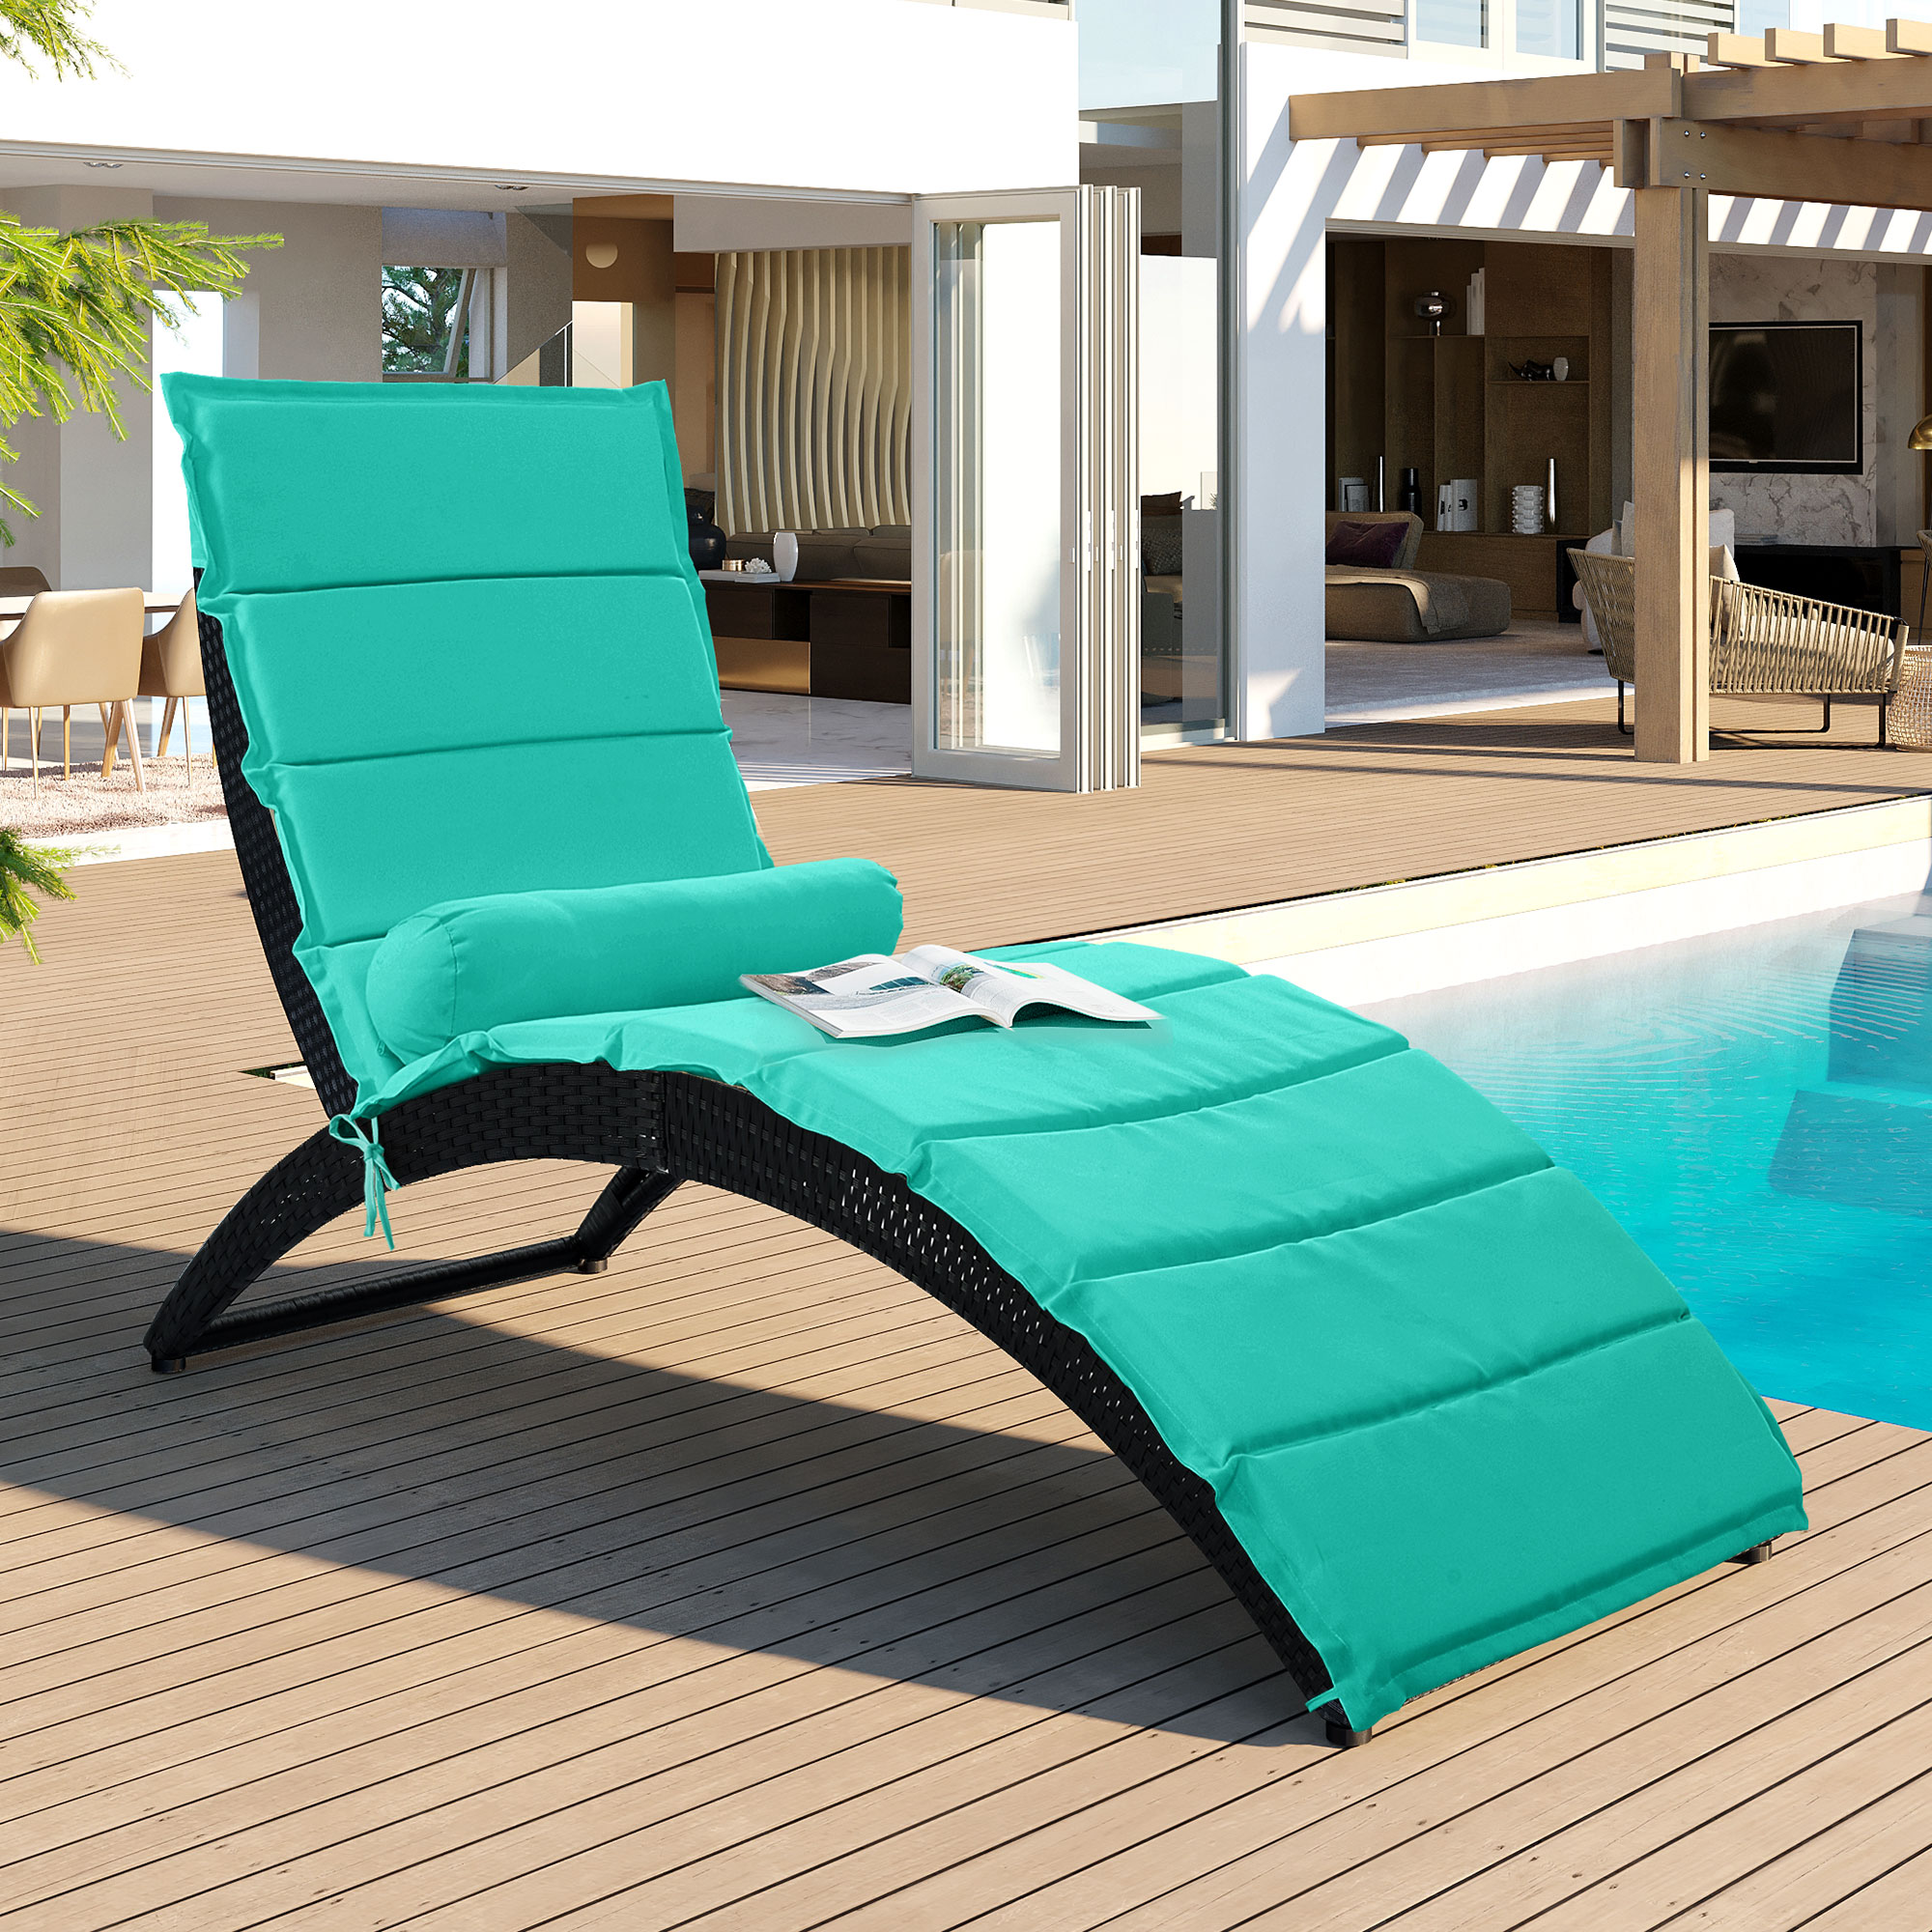 SYNGAR Patio Lounge Chair, Patio Chaise Lounges with Thickened Cushionand Bolster Pillow, PE Rattan Steel Frame Pool Lounge Chair for Patio Backyard Porch Garden Poolside, Blue - image 1 of 9